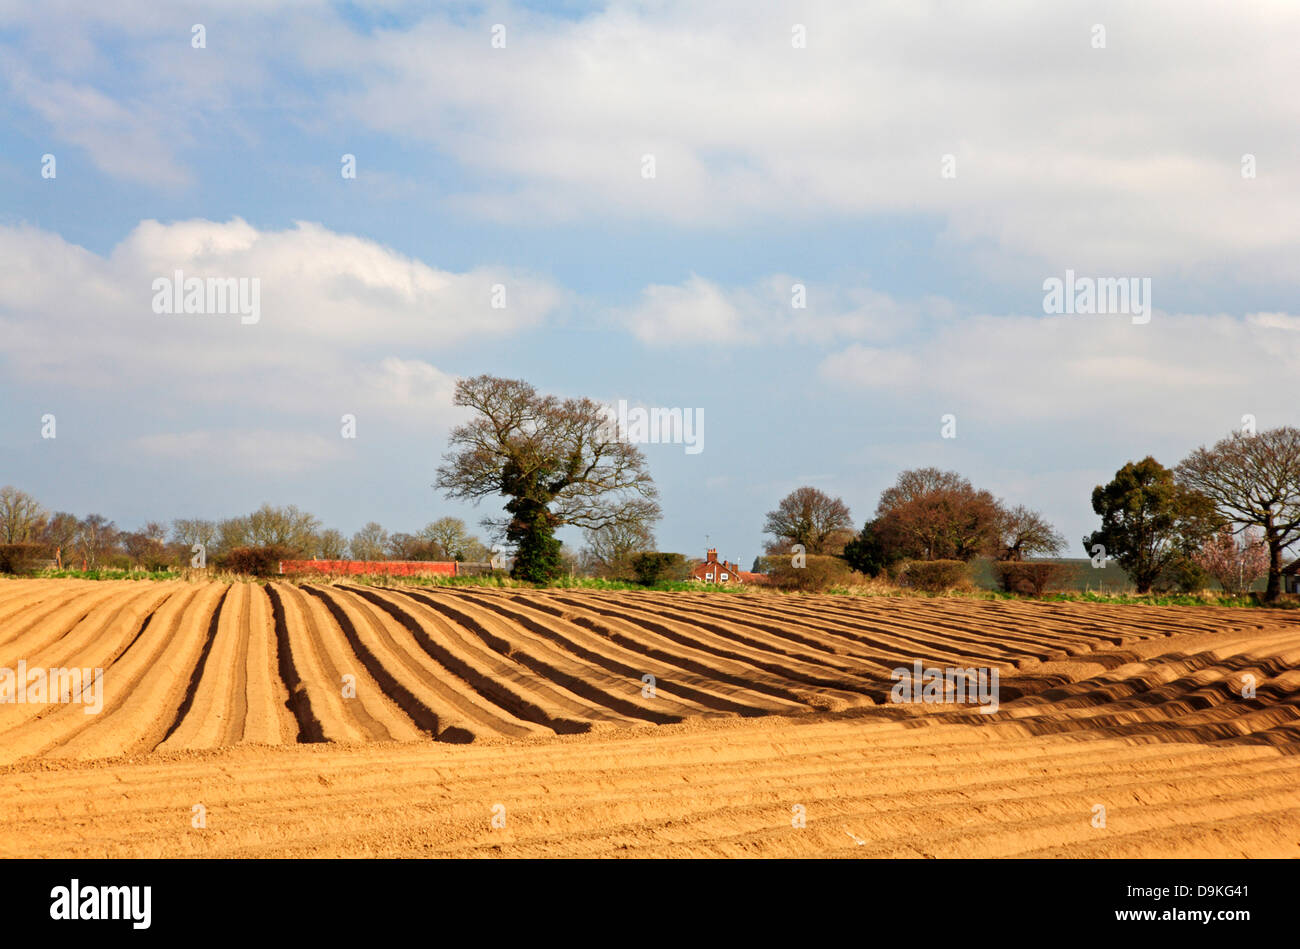 A view of a planted potato field with ridges on farmland in Norfolk, England, United Kingdom. Stock Photo